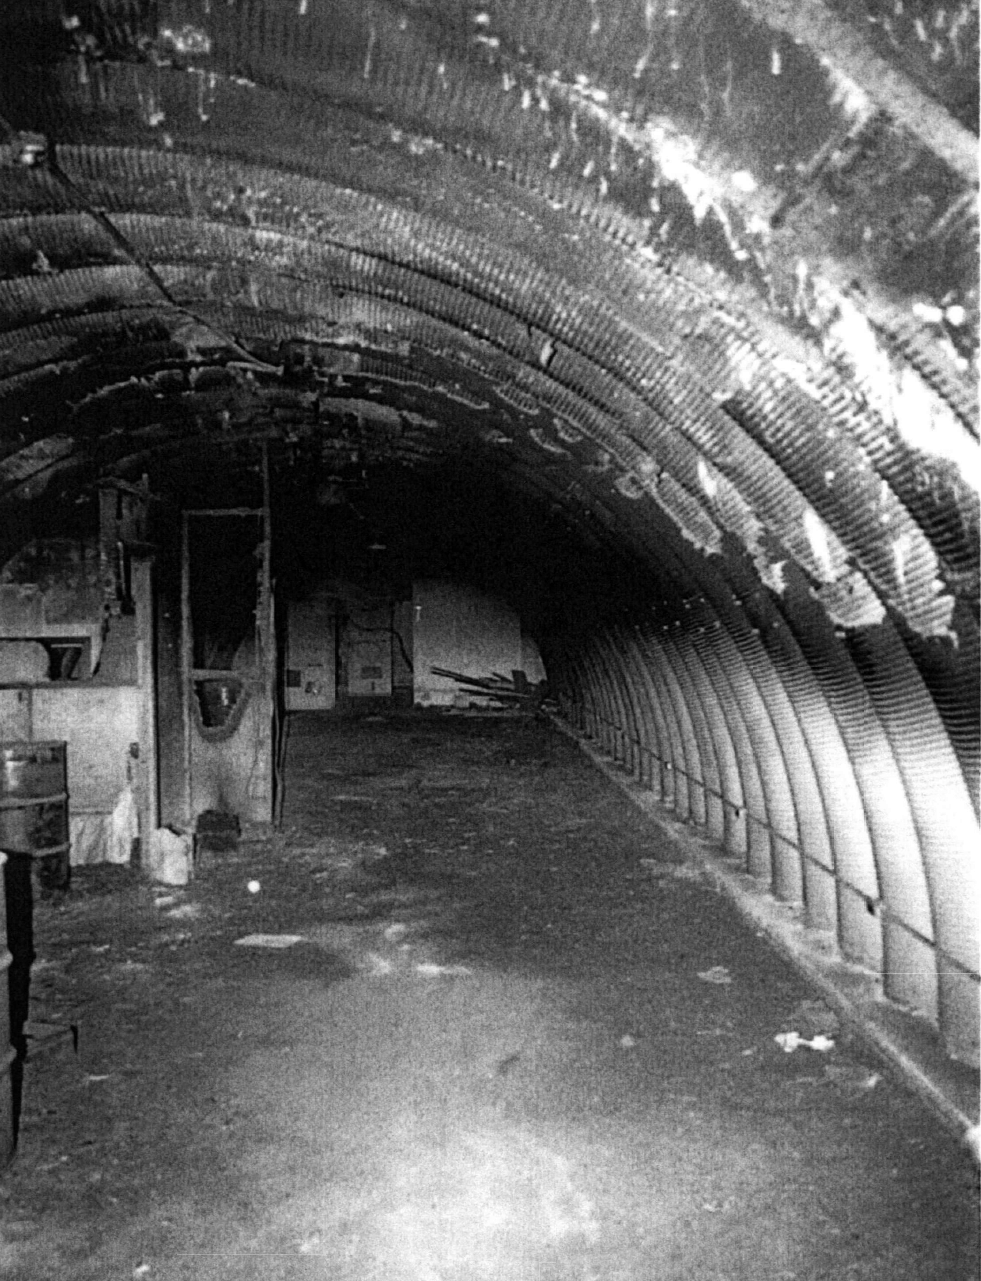 Black and white image showing ruined interior of a buried quonset hut